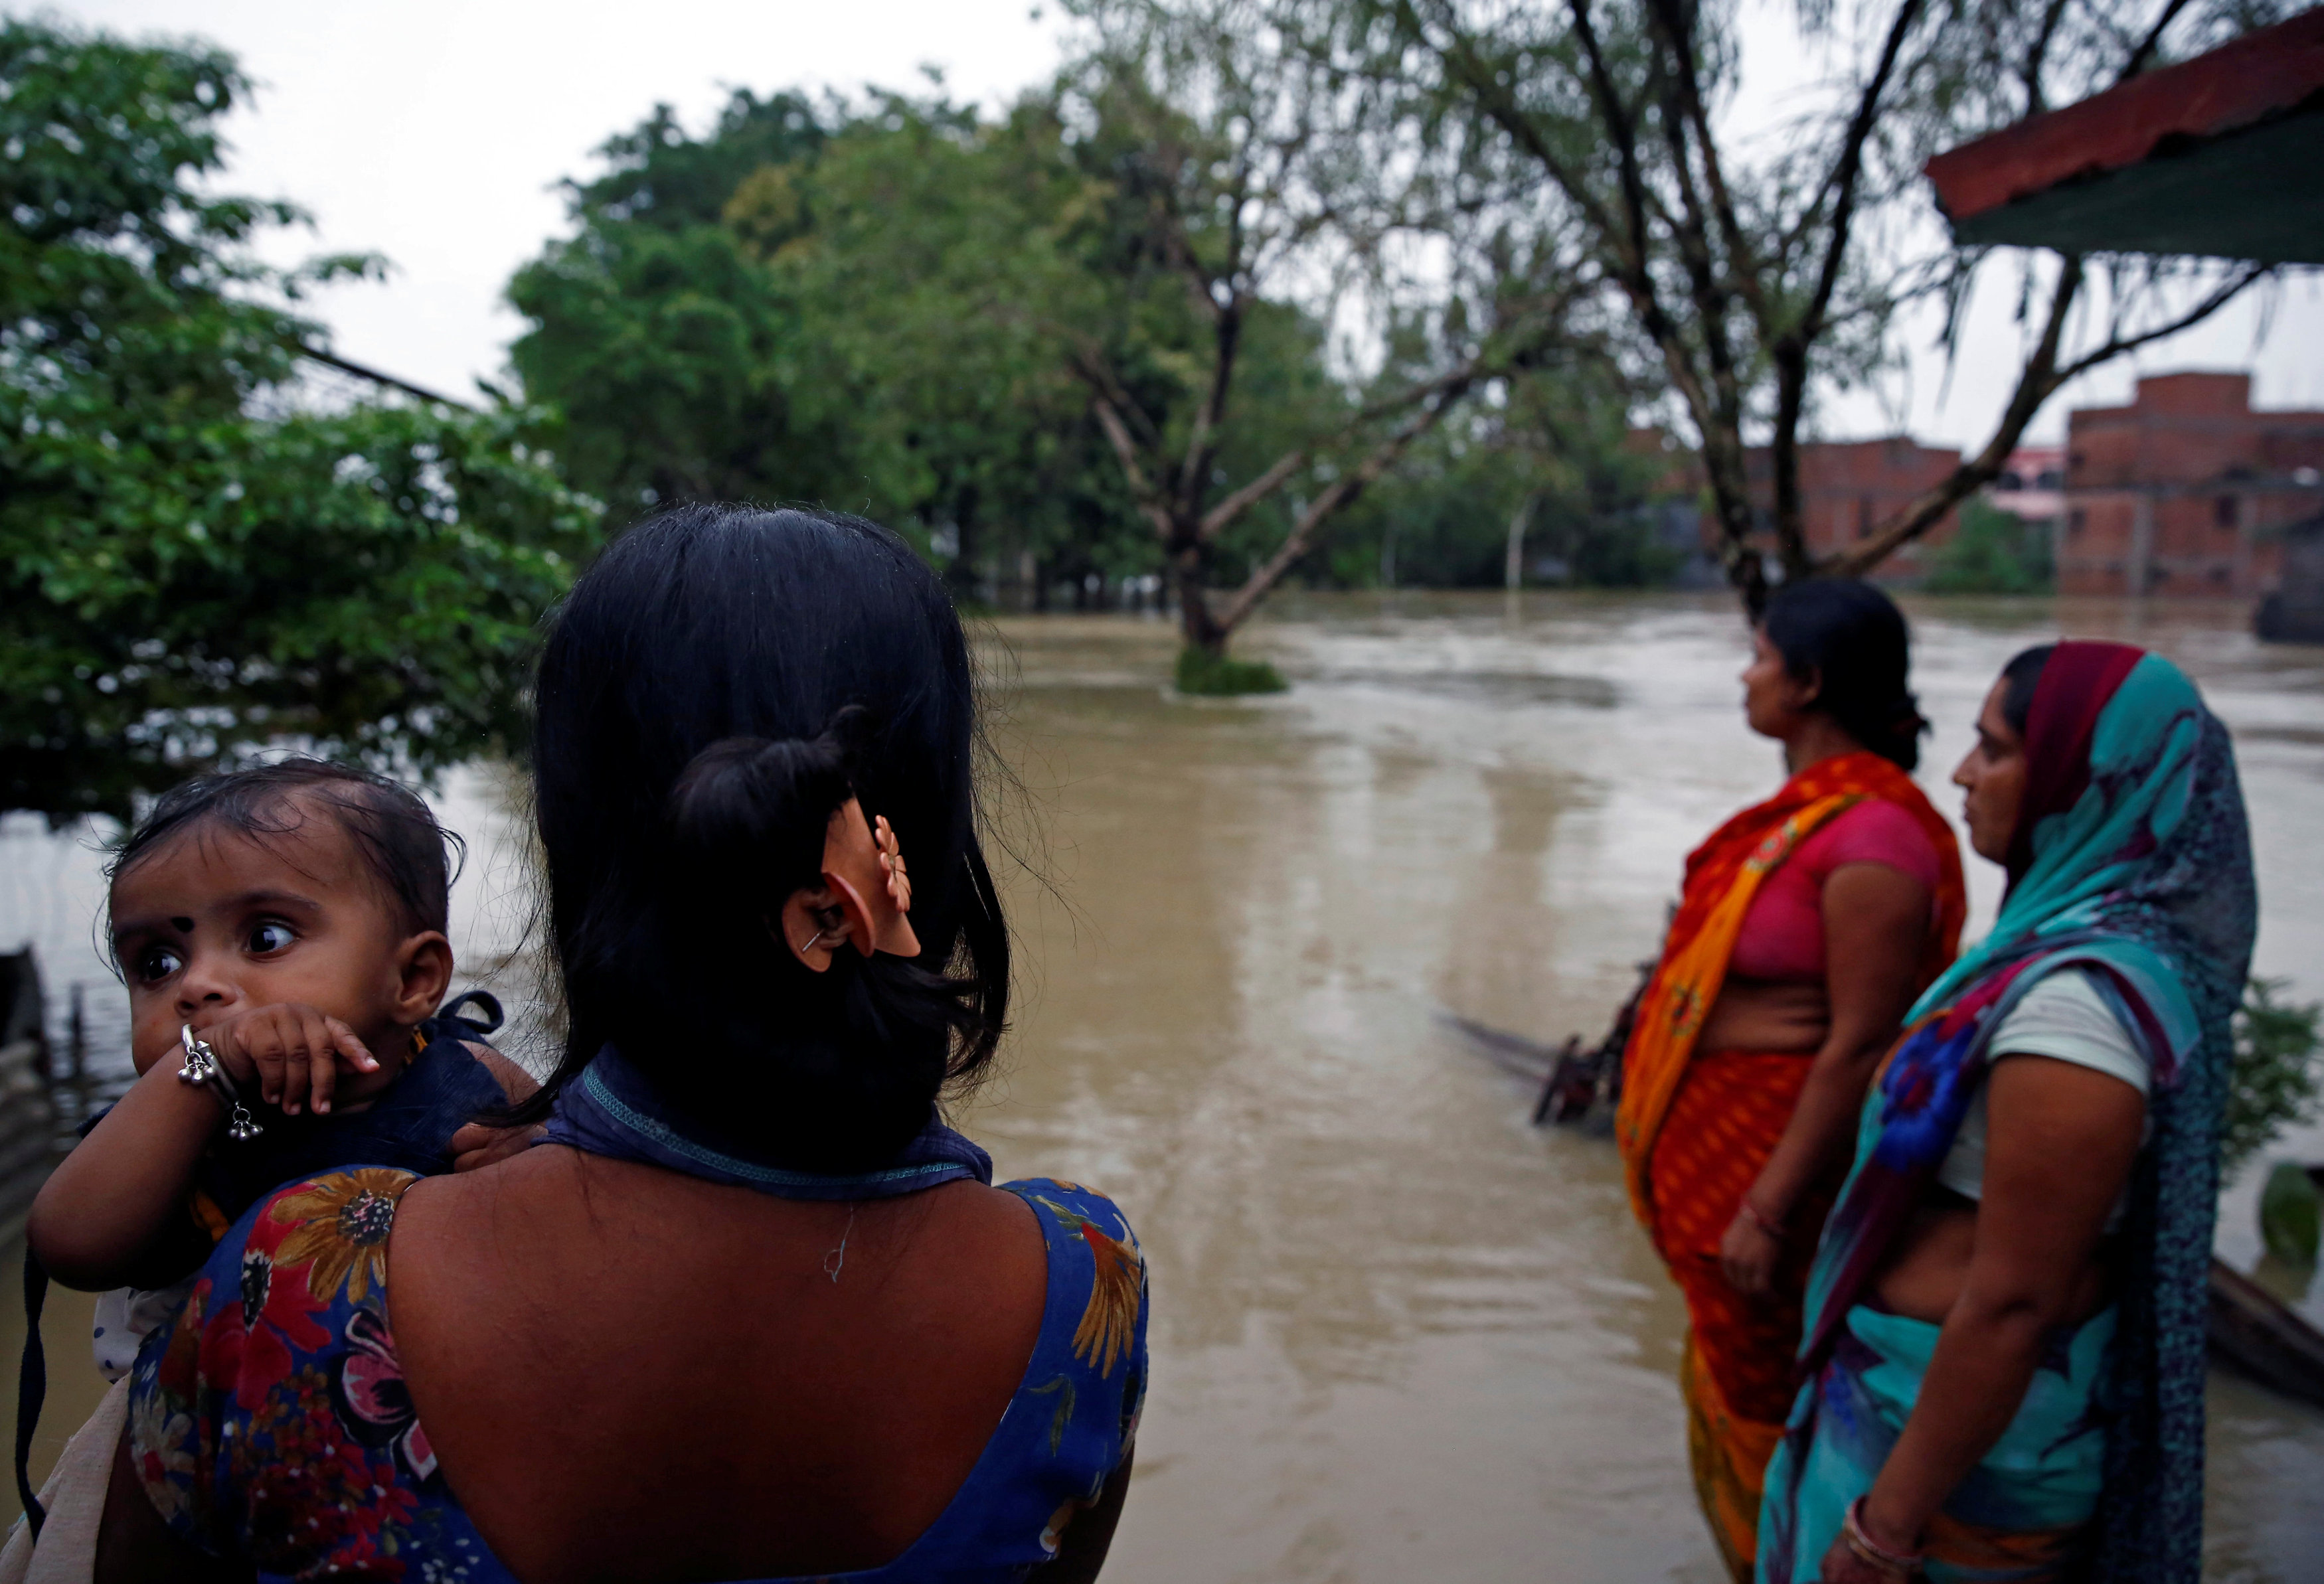 In pictures: Floods in Nepal